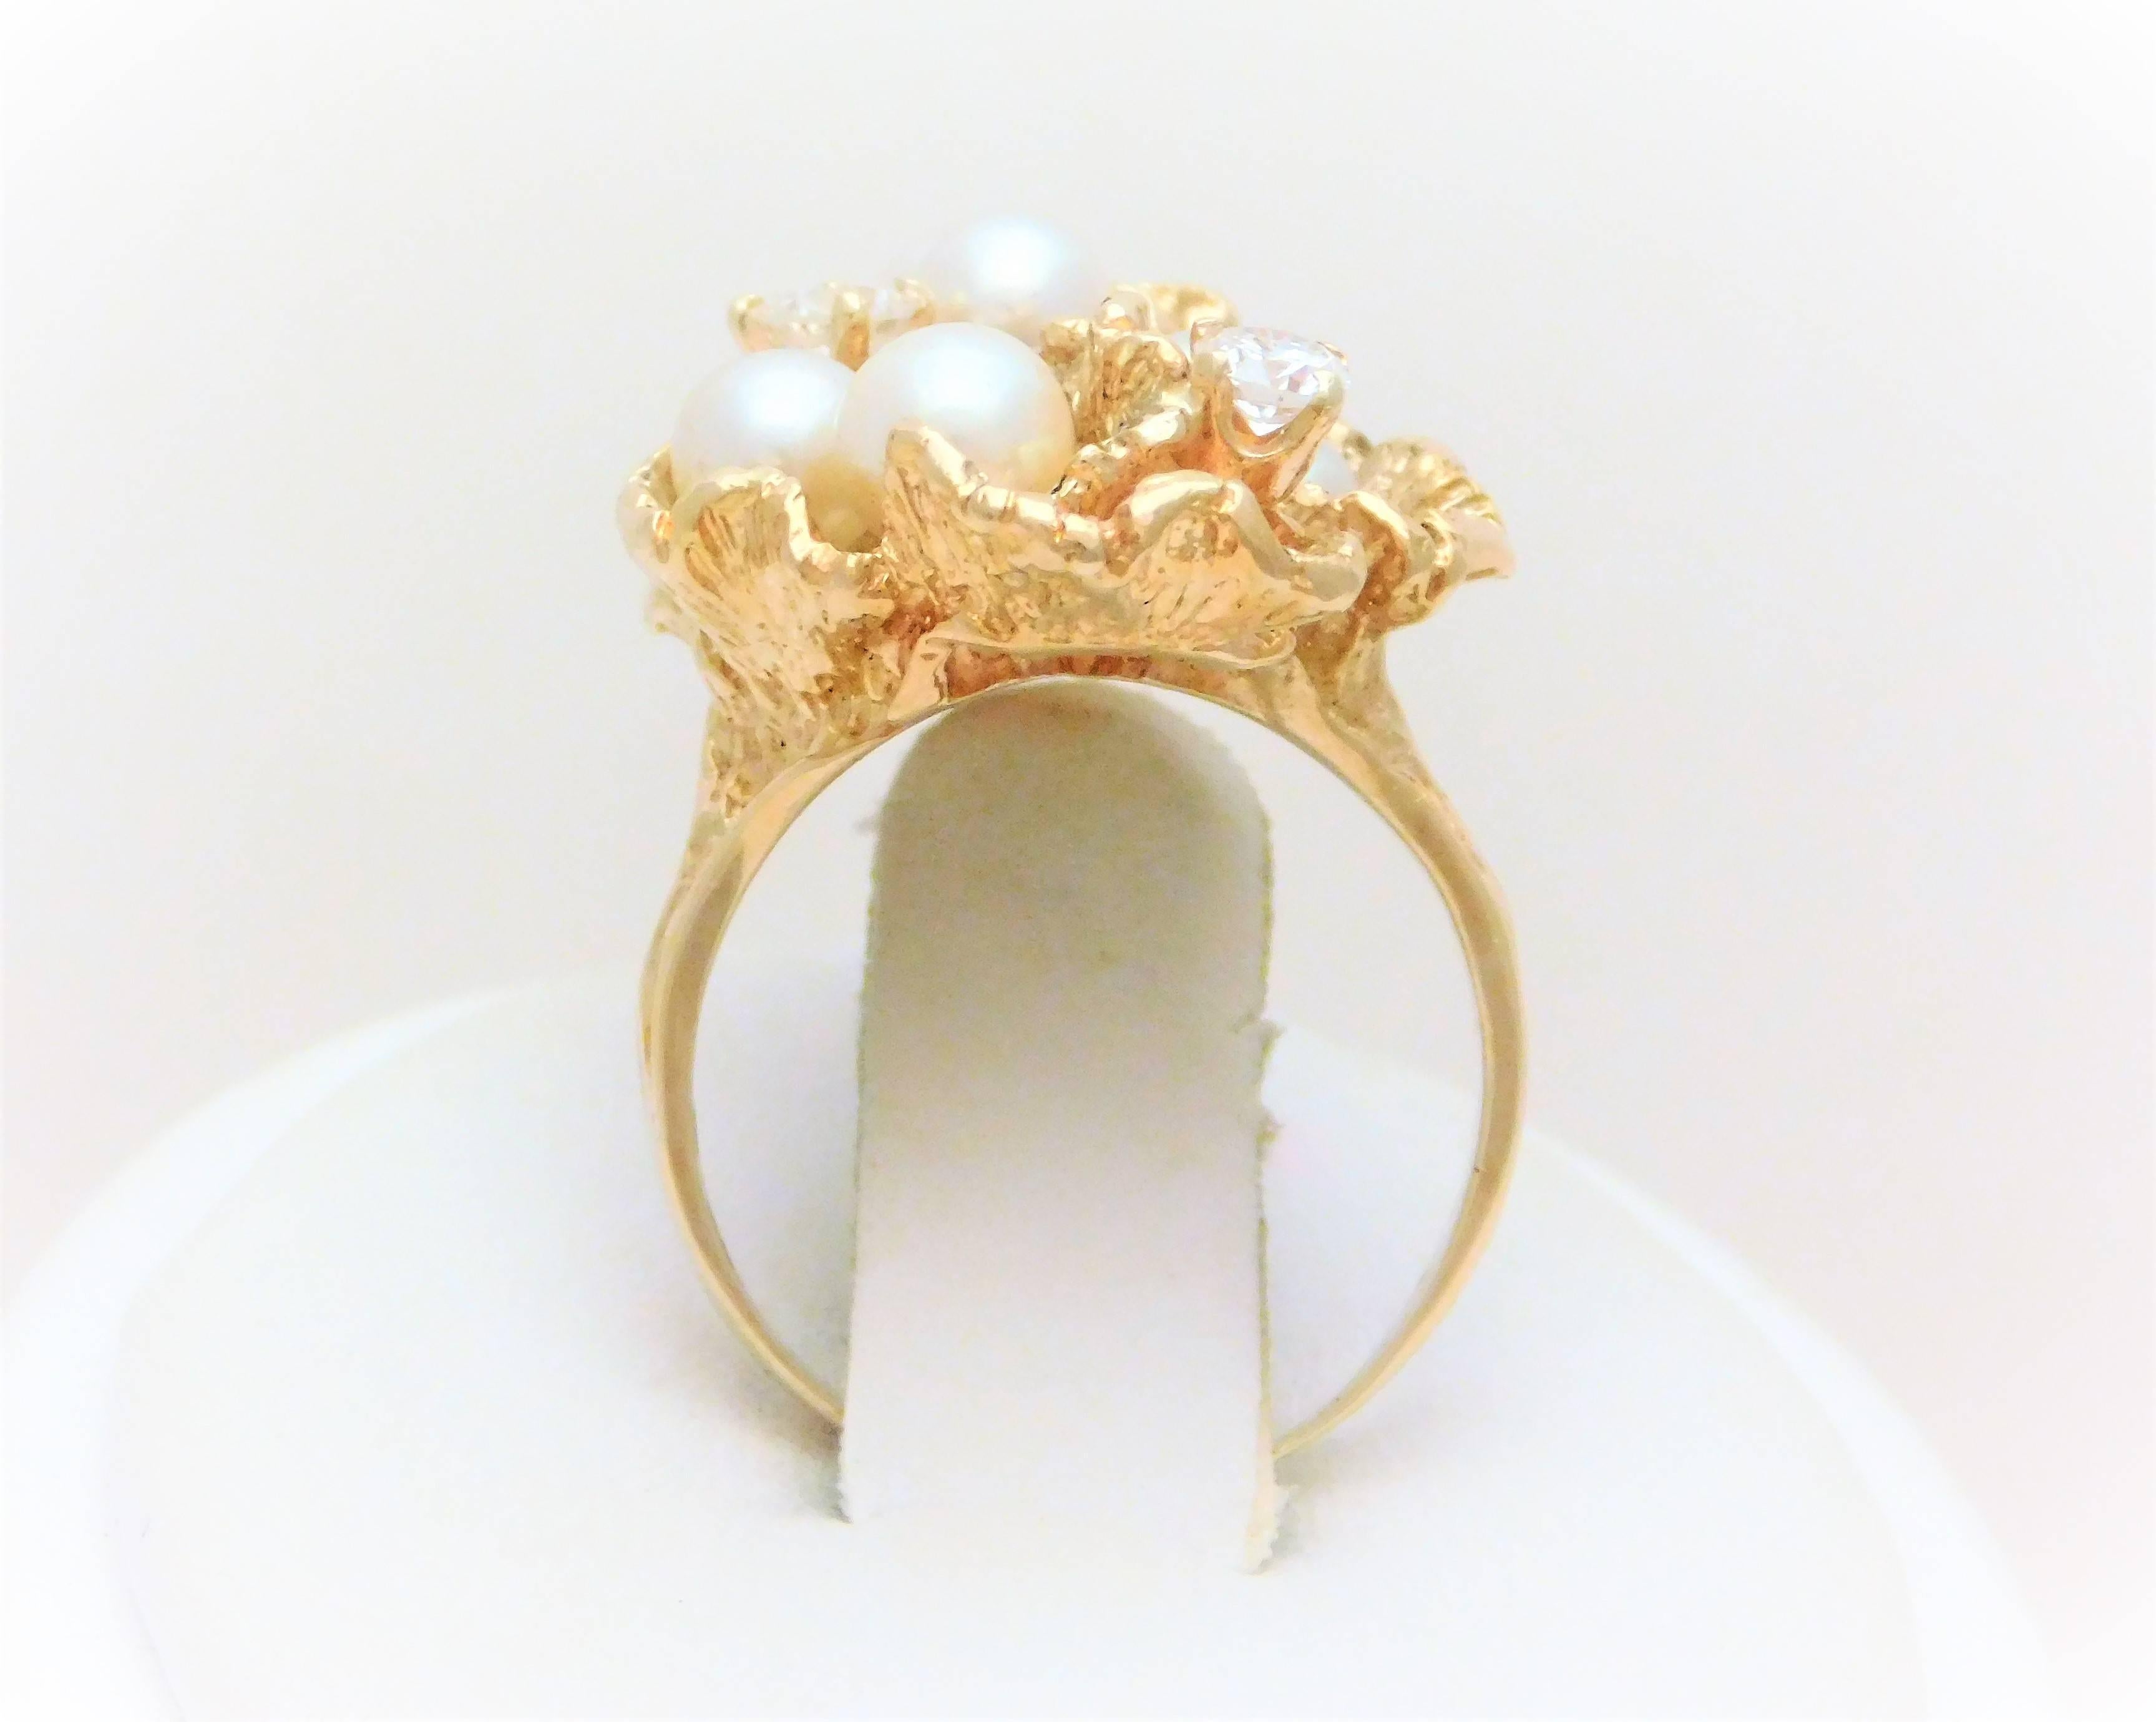 Handmade 14 Karat Diamond and Pearl “Oyster” Ring In Excellent Condition For Sale In Metairie, LA